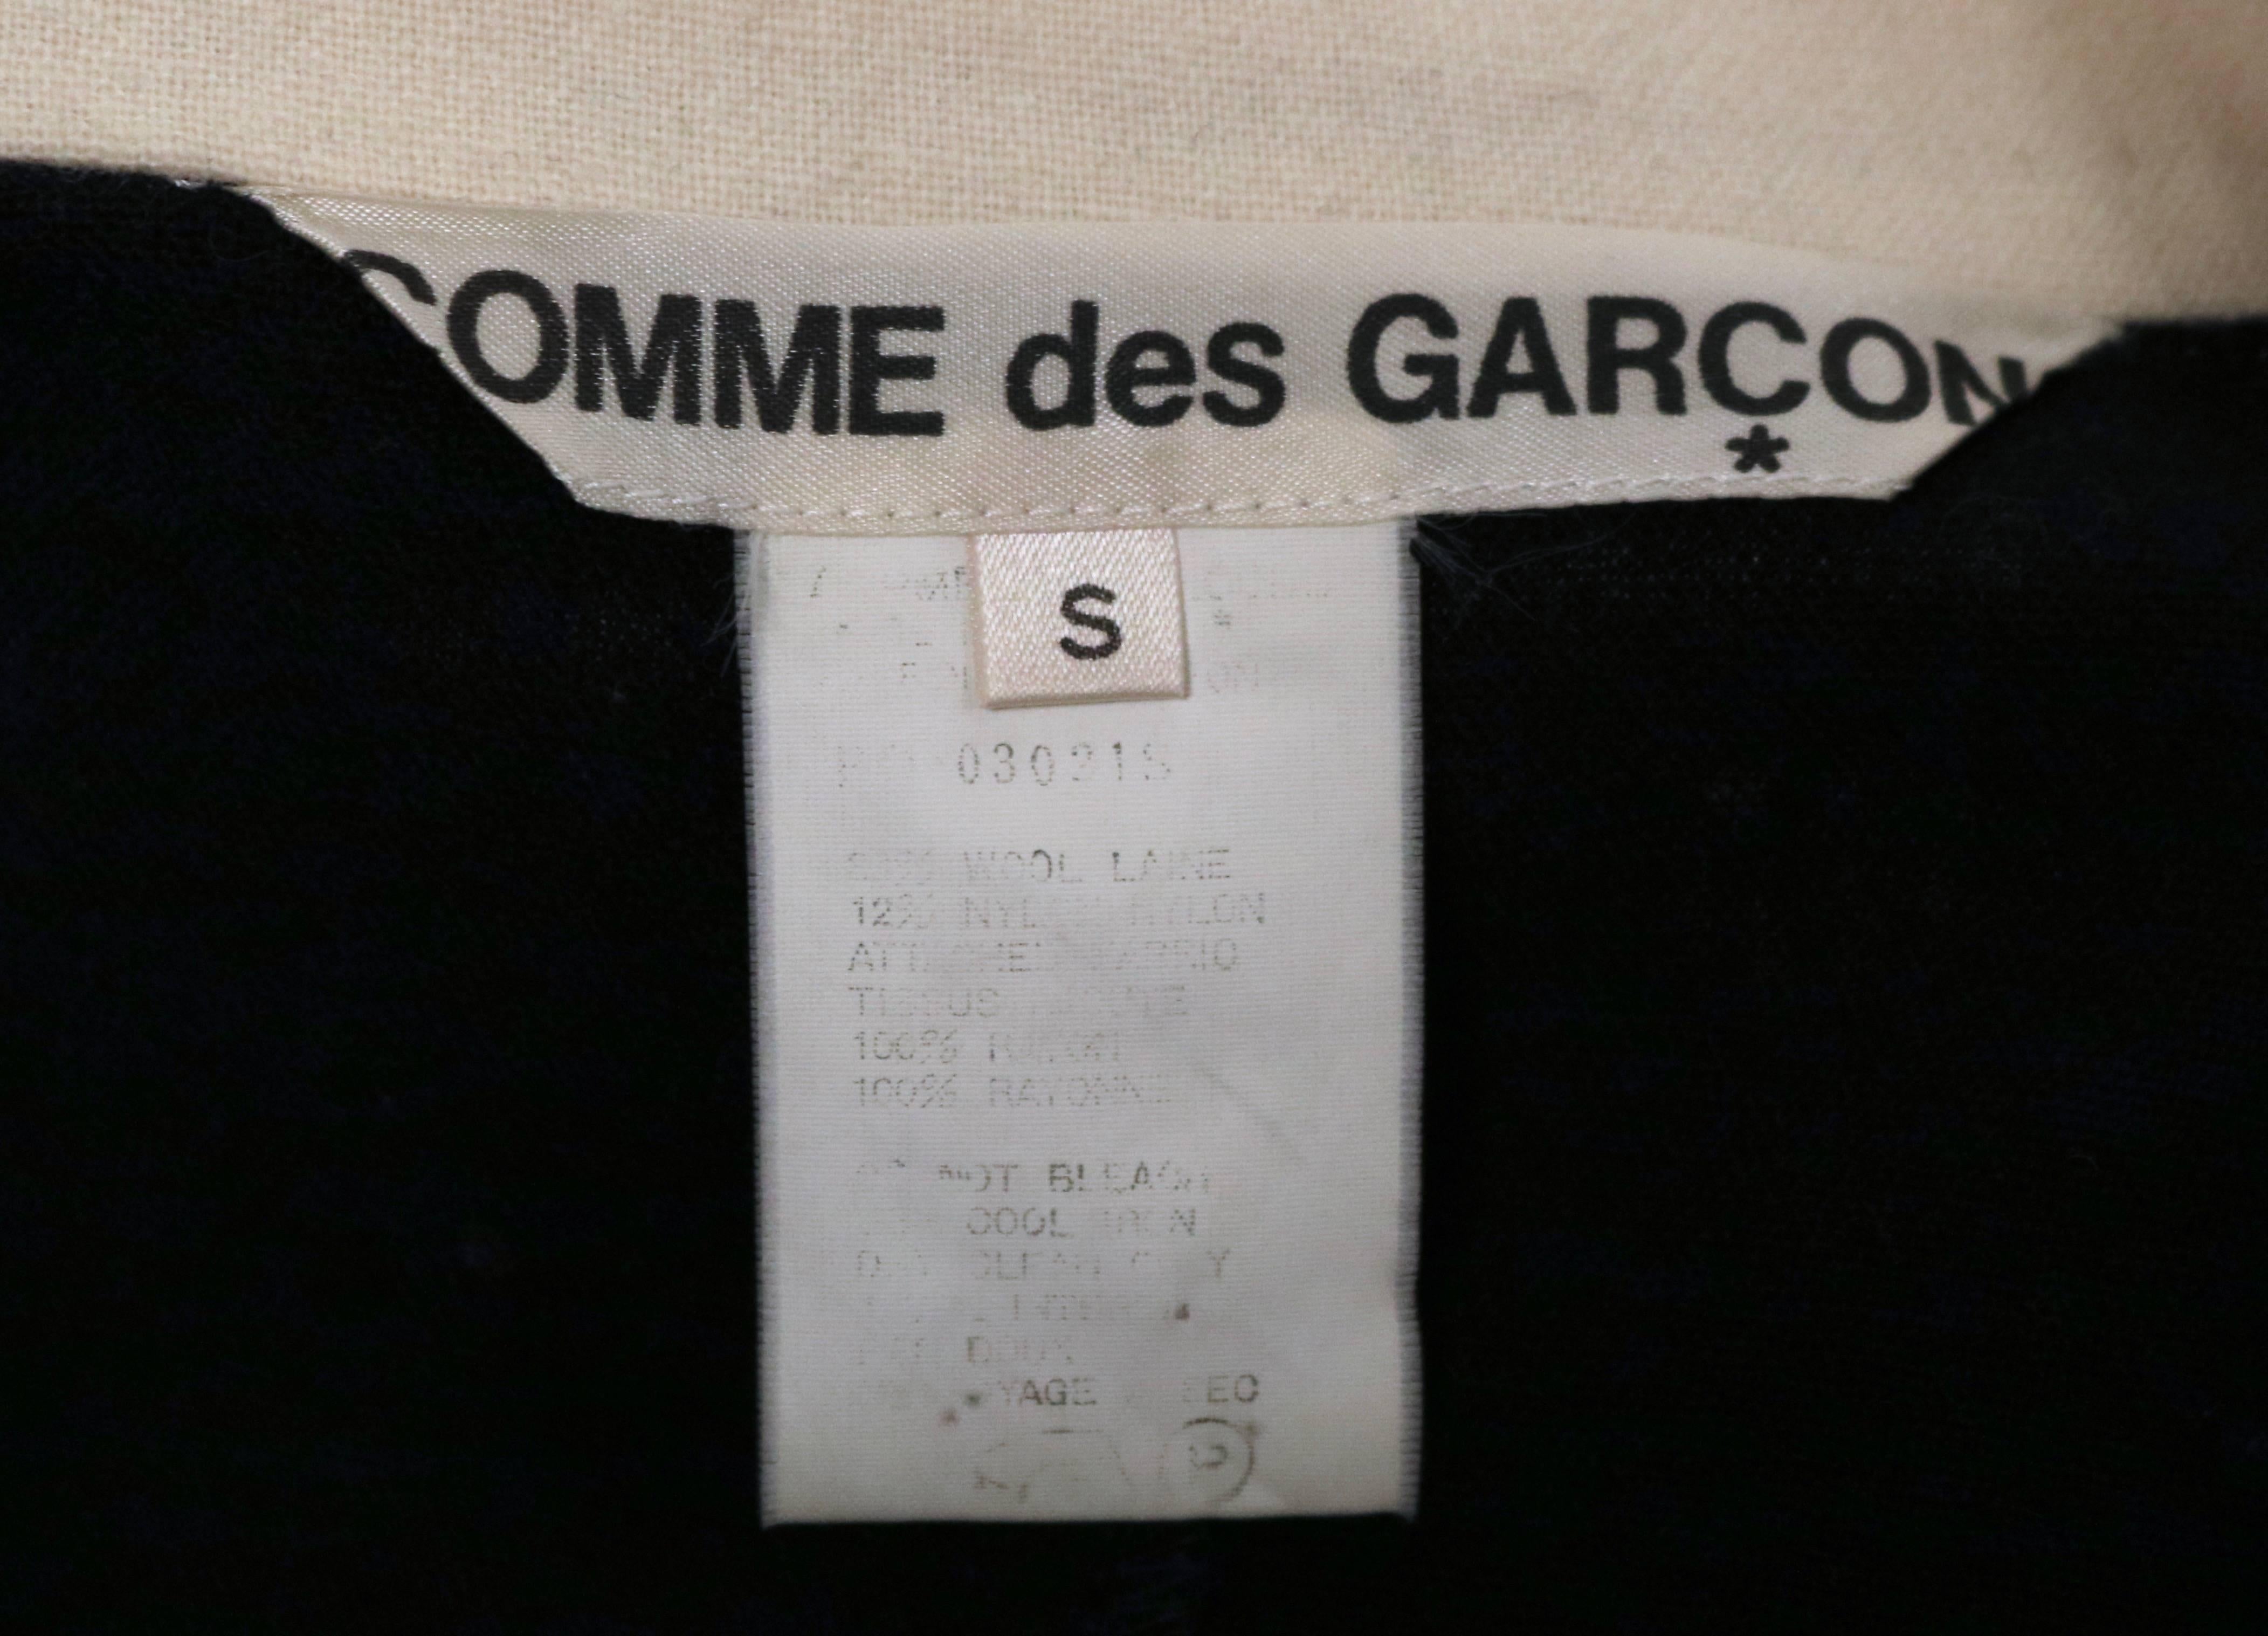 1985 COMME DES GARCONS navy wool draped dress with polka dots 2